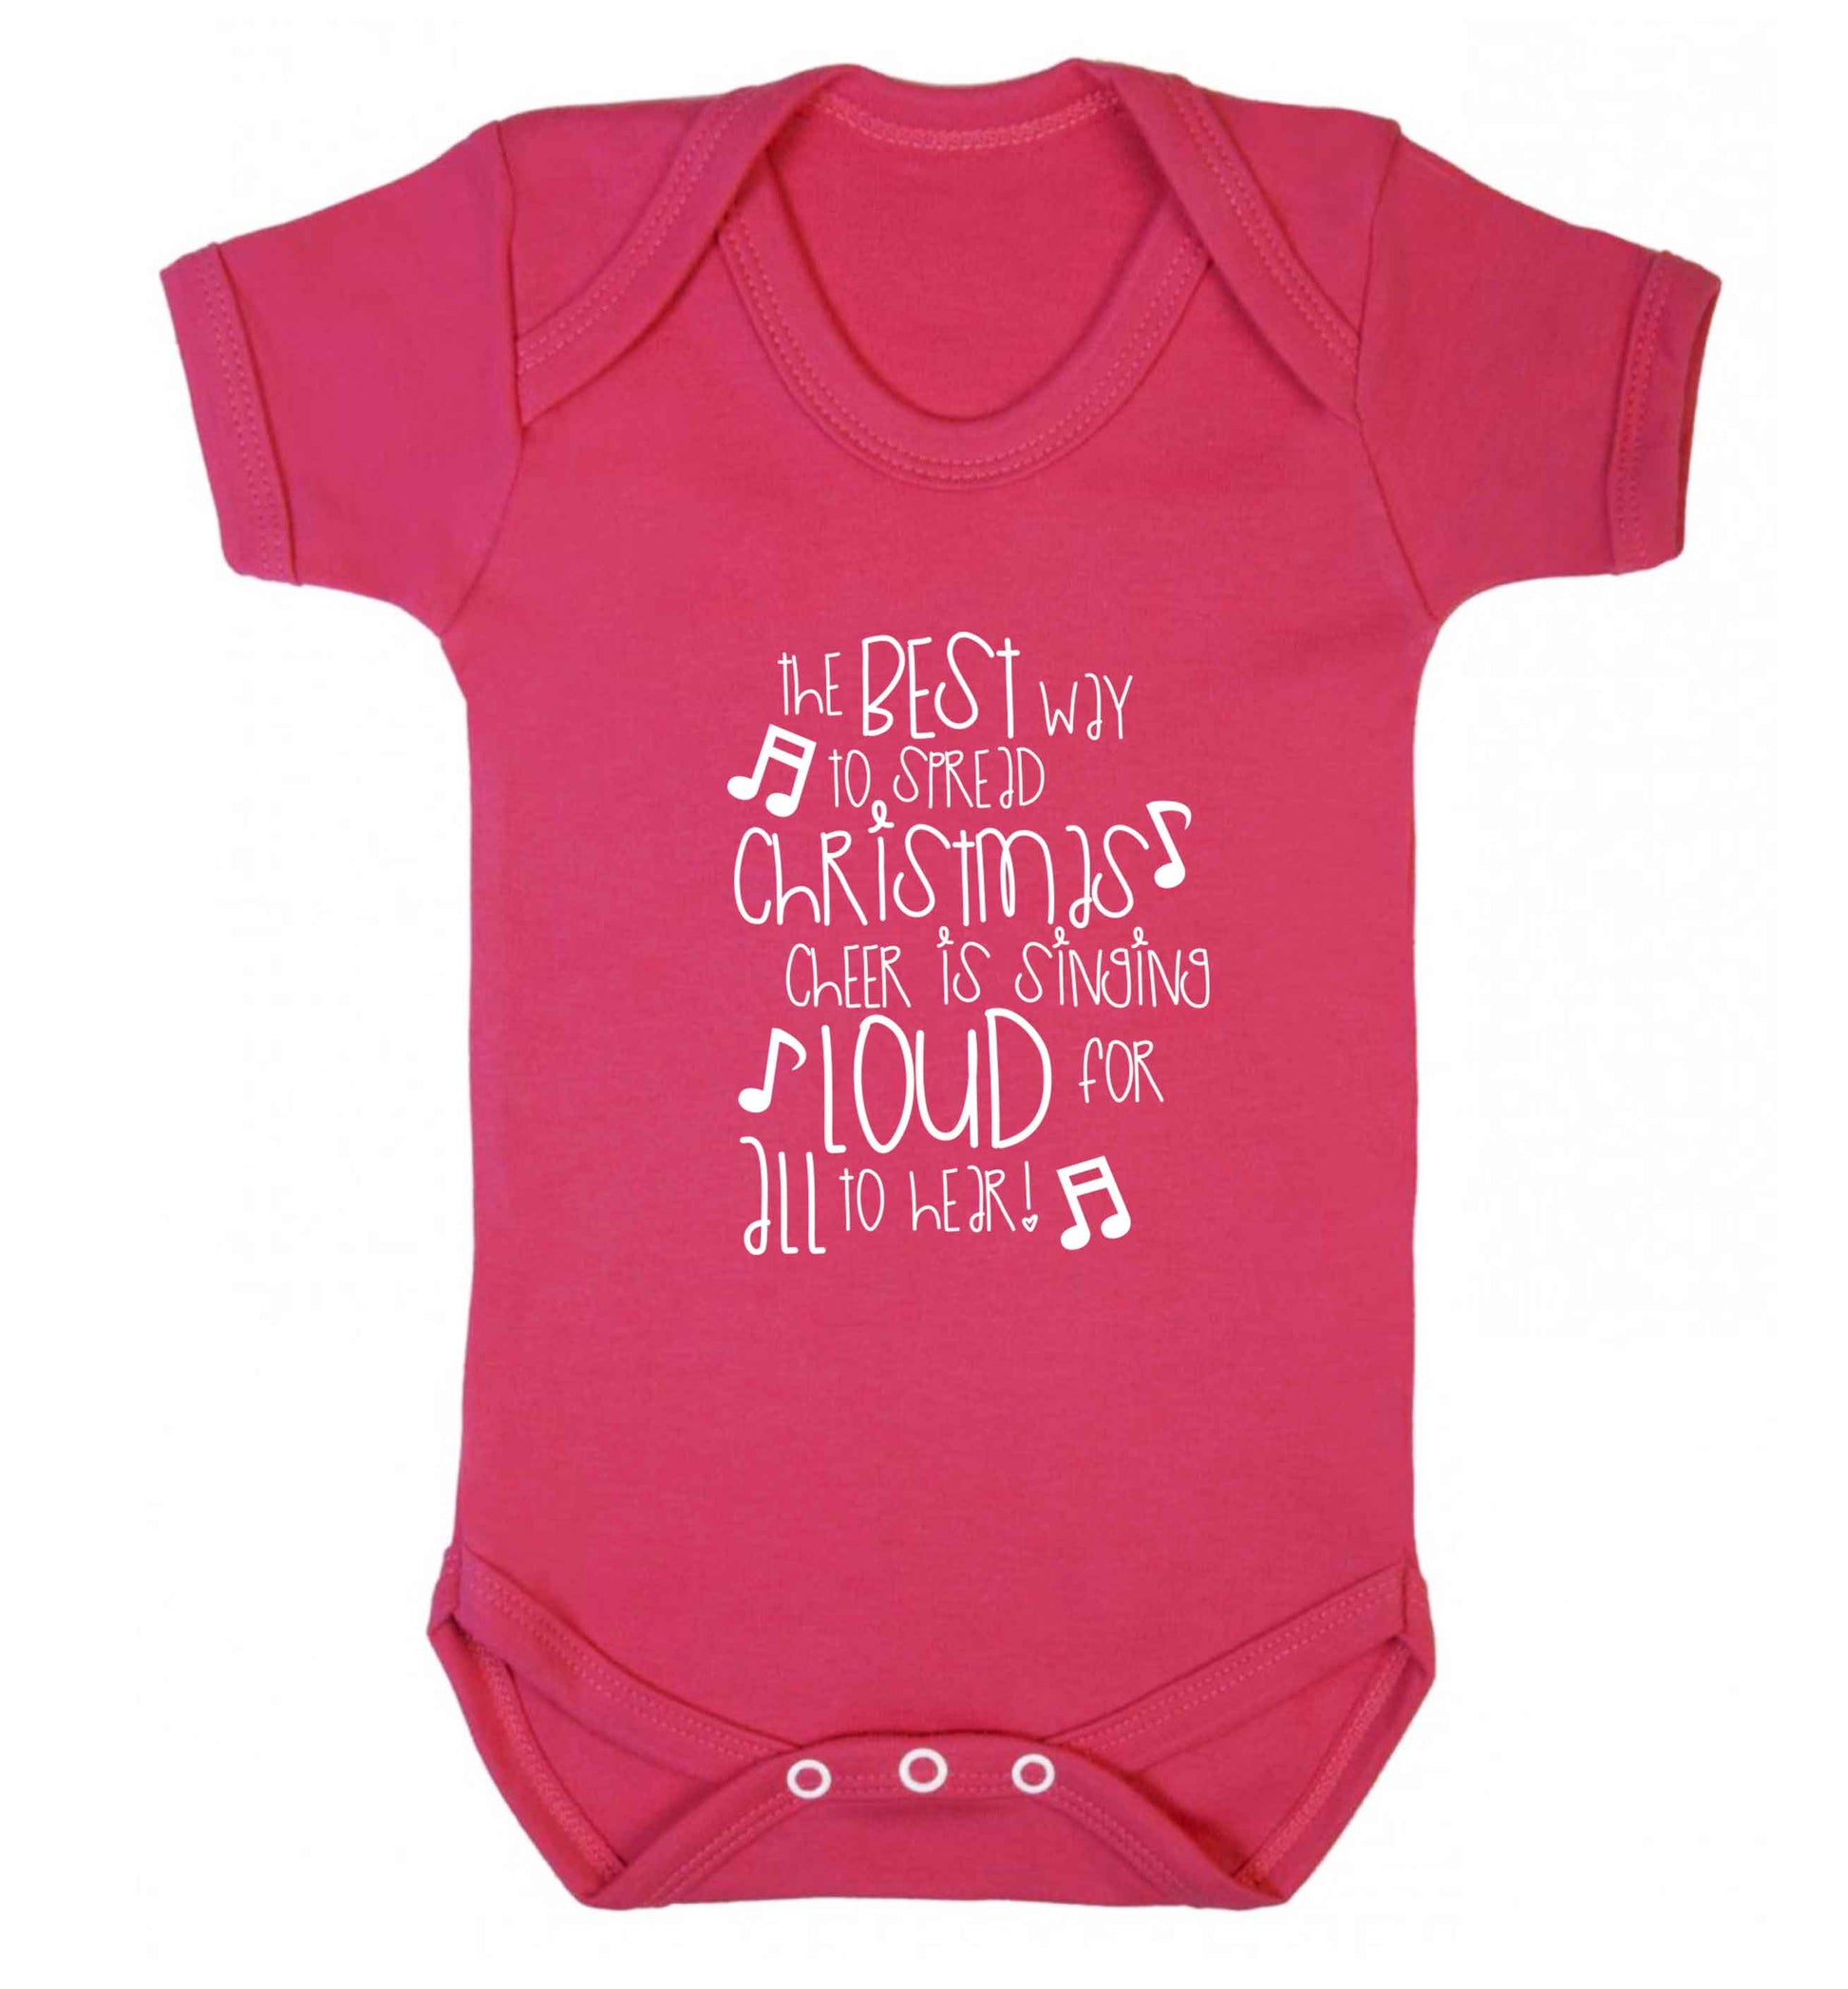 The best way to spread Christmas cheer is singing loud for all to hear baby vest dark pink 18-24 months